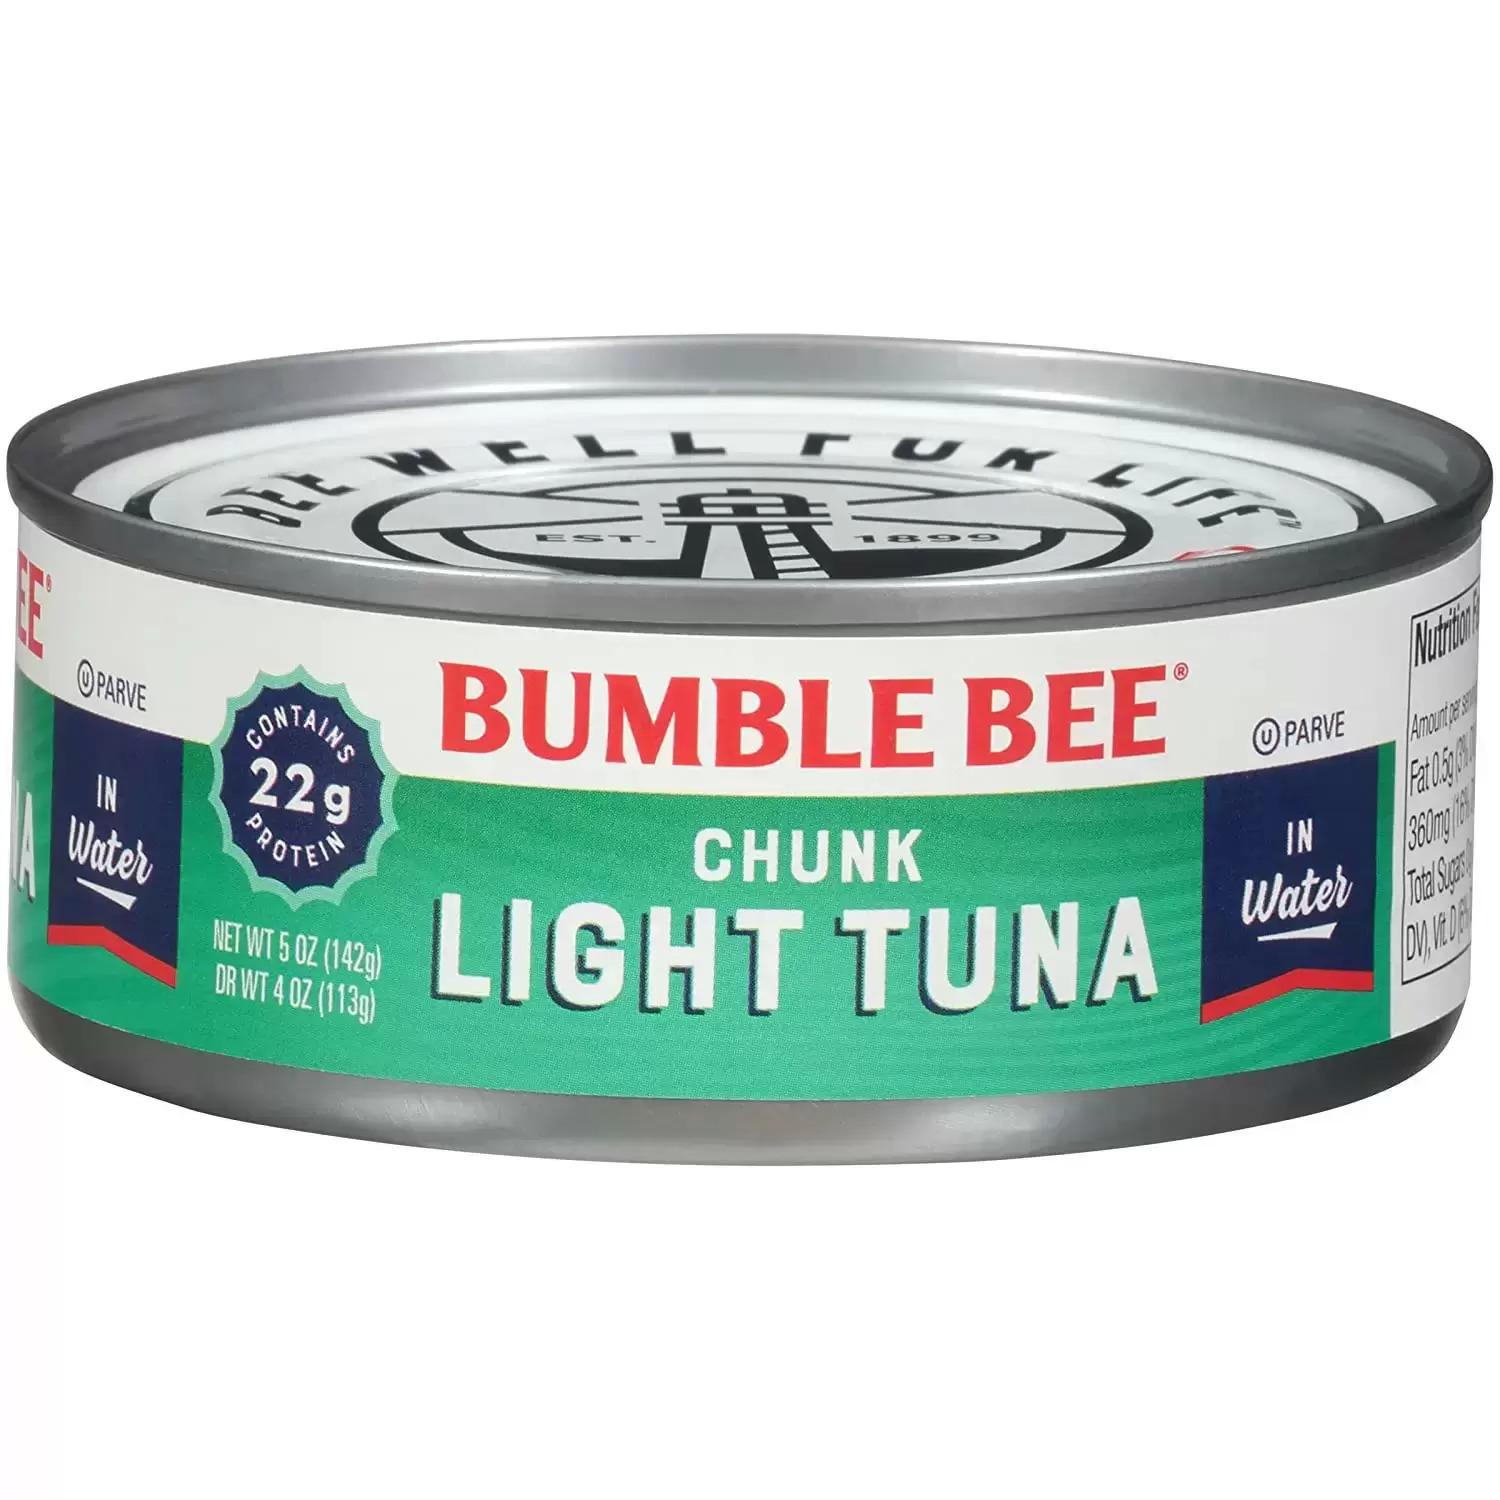 Bumble Bee Chunk Light Tuna In Water 24 Cans for $16.02 Shipped